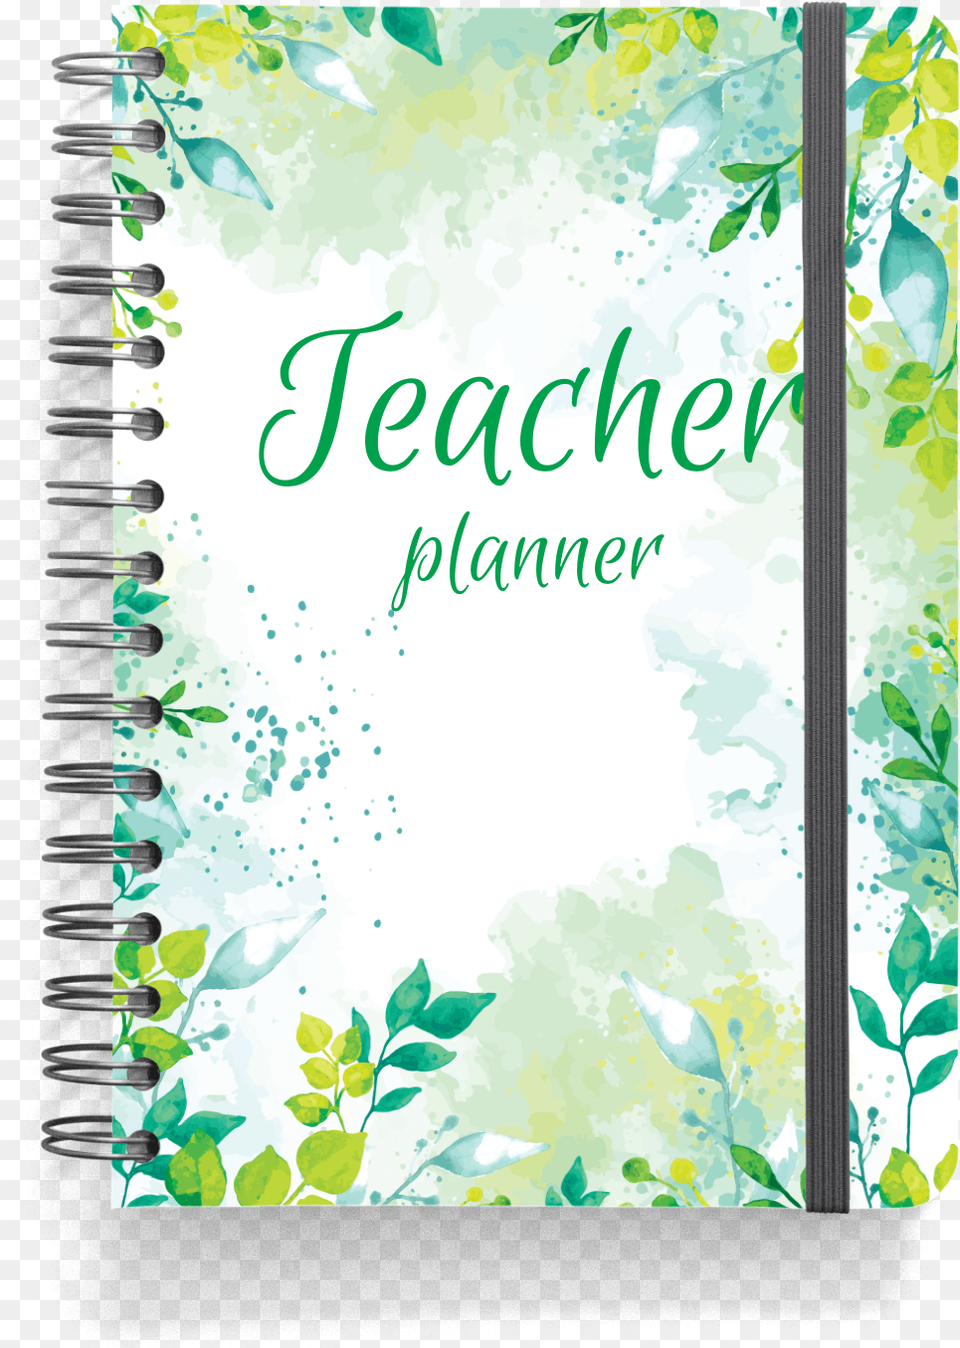 Printable Teacher Planner Spiral Bound Graphic Design, Book, Publication, Diary Png Image